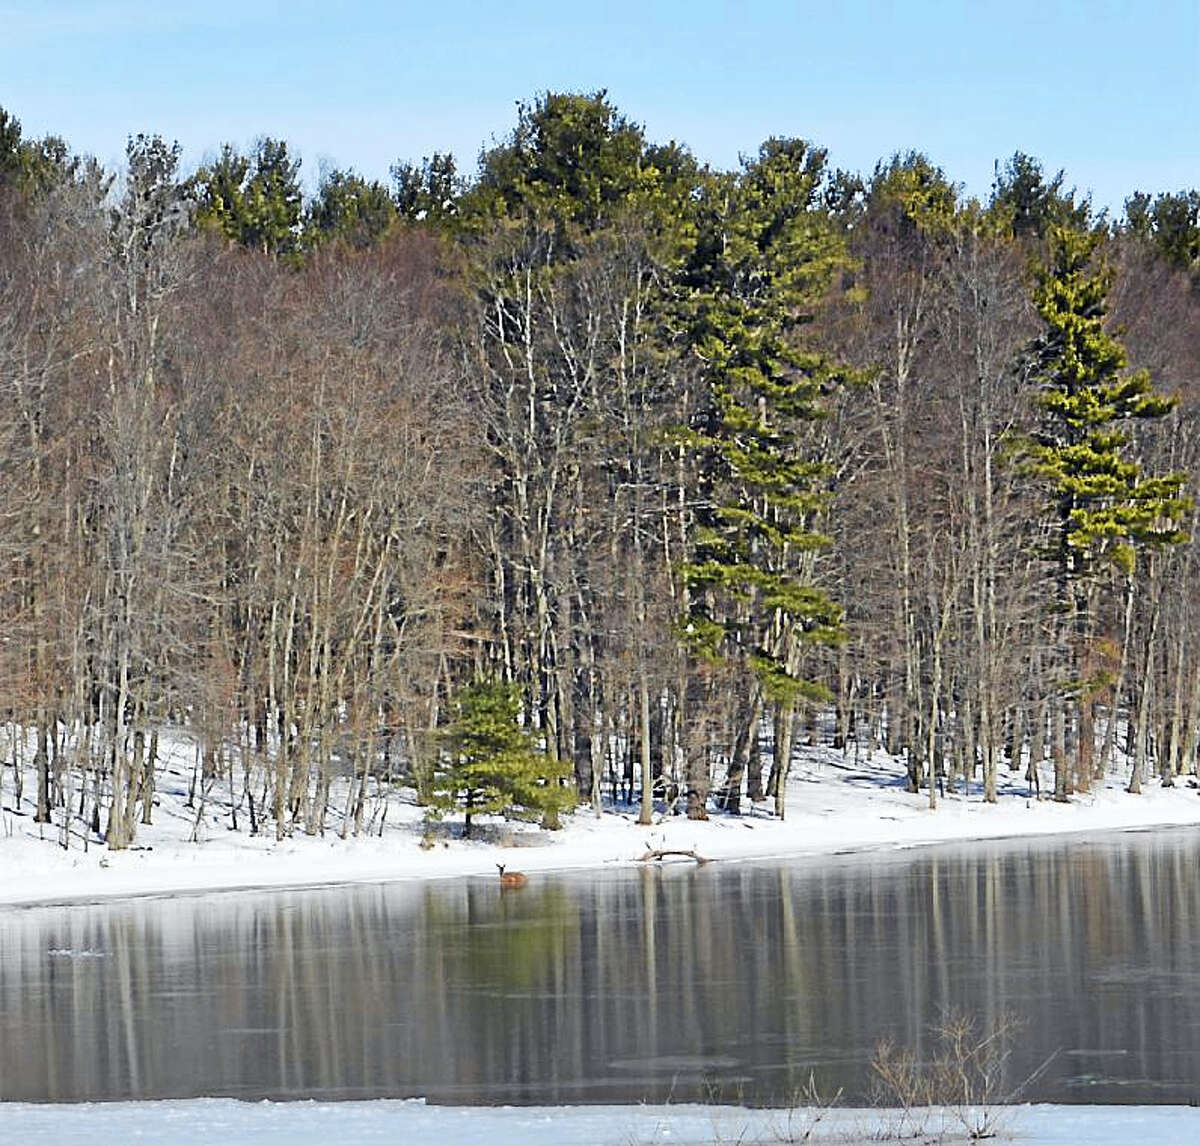 For three hours Friday morning, a deer was stuck on ice at the Mt. Higby Reservoir. She eventually make her way finally closer to shore, regained her footing, then pranced off into the woods off Route 66 on the Middletown/Middlefield line.